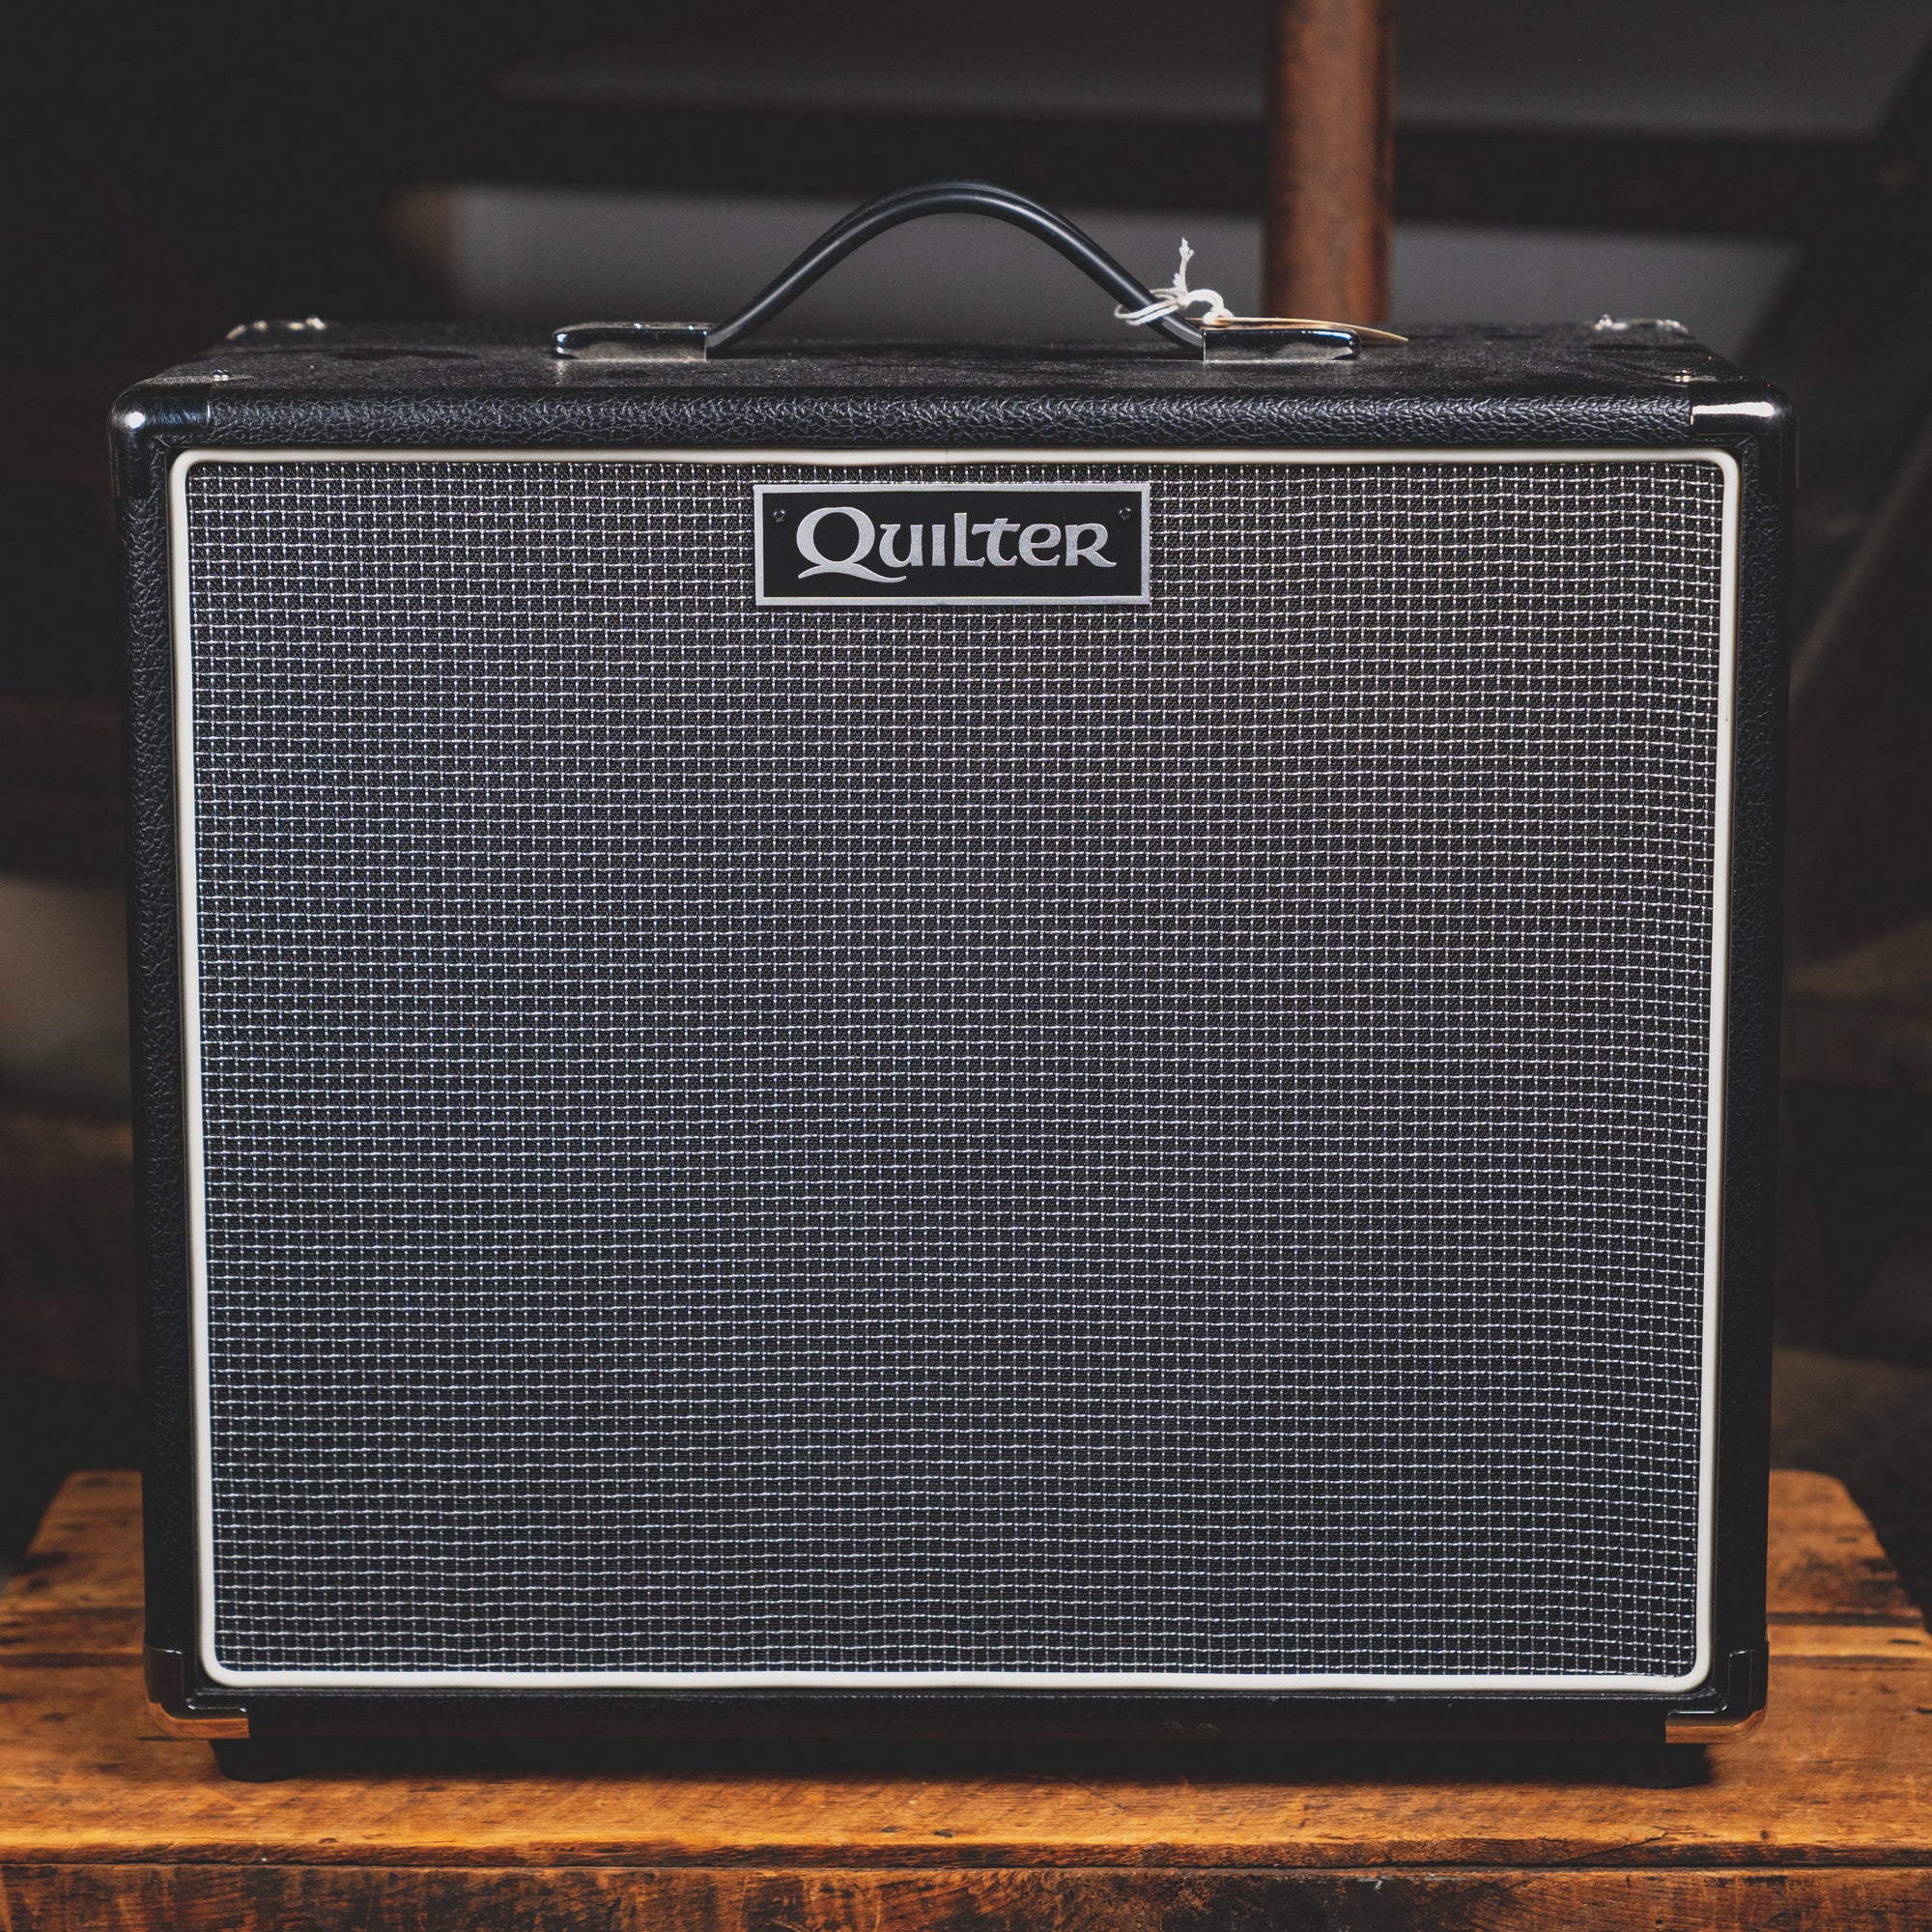 Quilter Tone Block 202 Guitar Amplifier Head and Cabinet W/ Slipcover